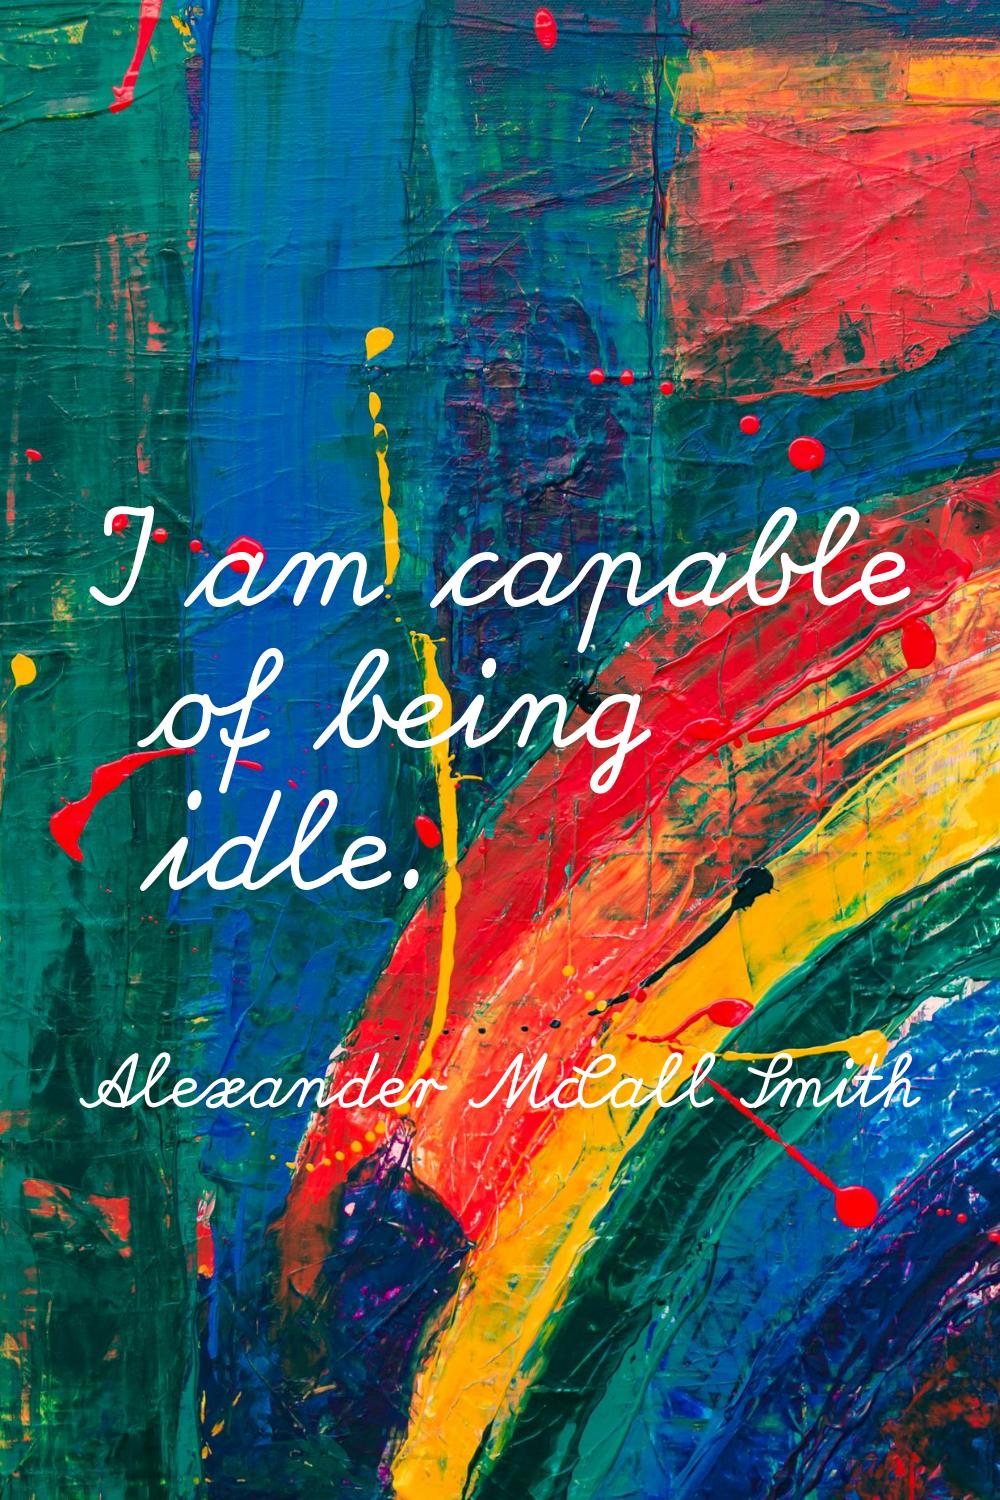 I am capable of being idle.